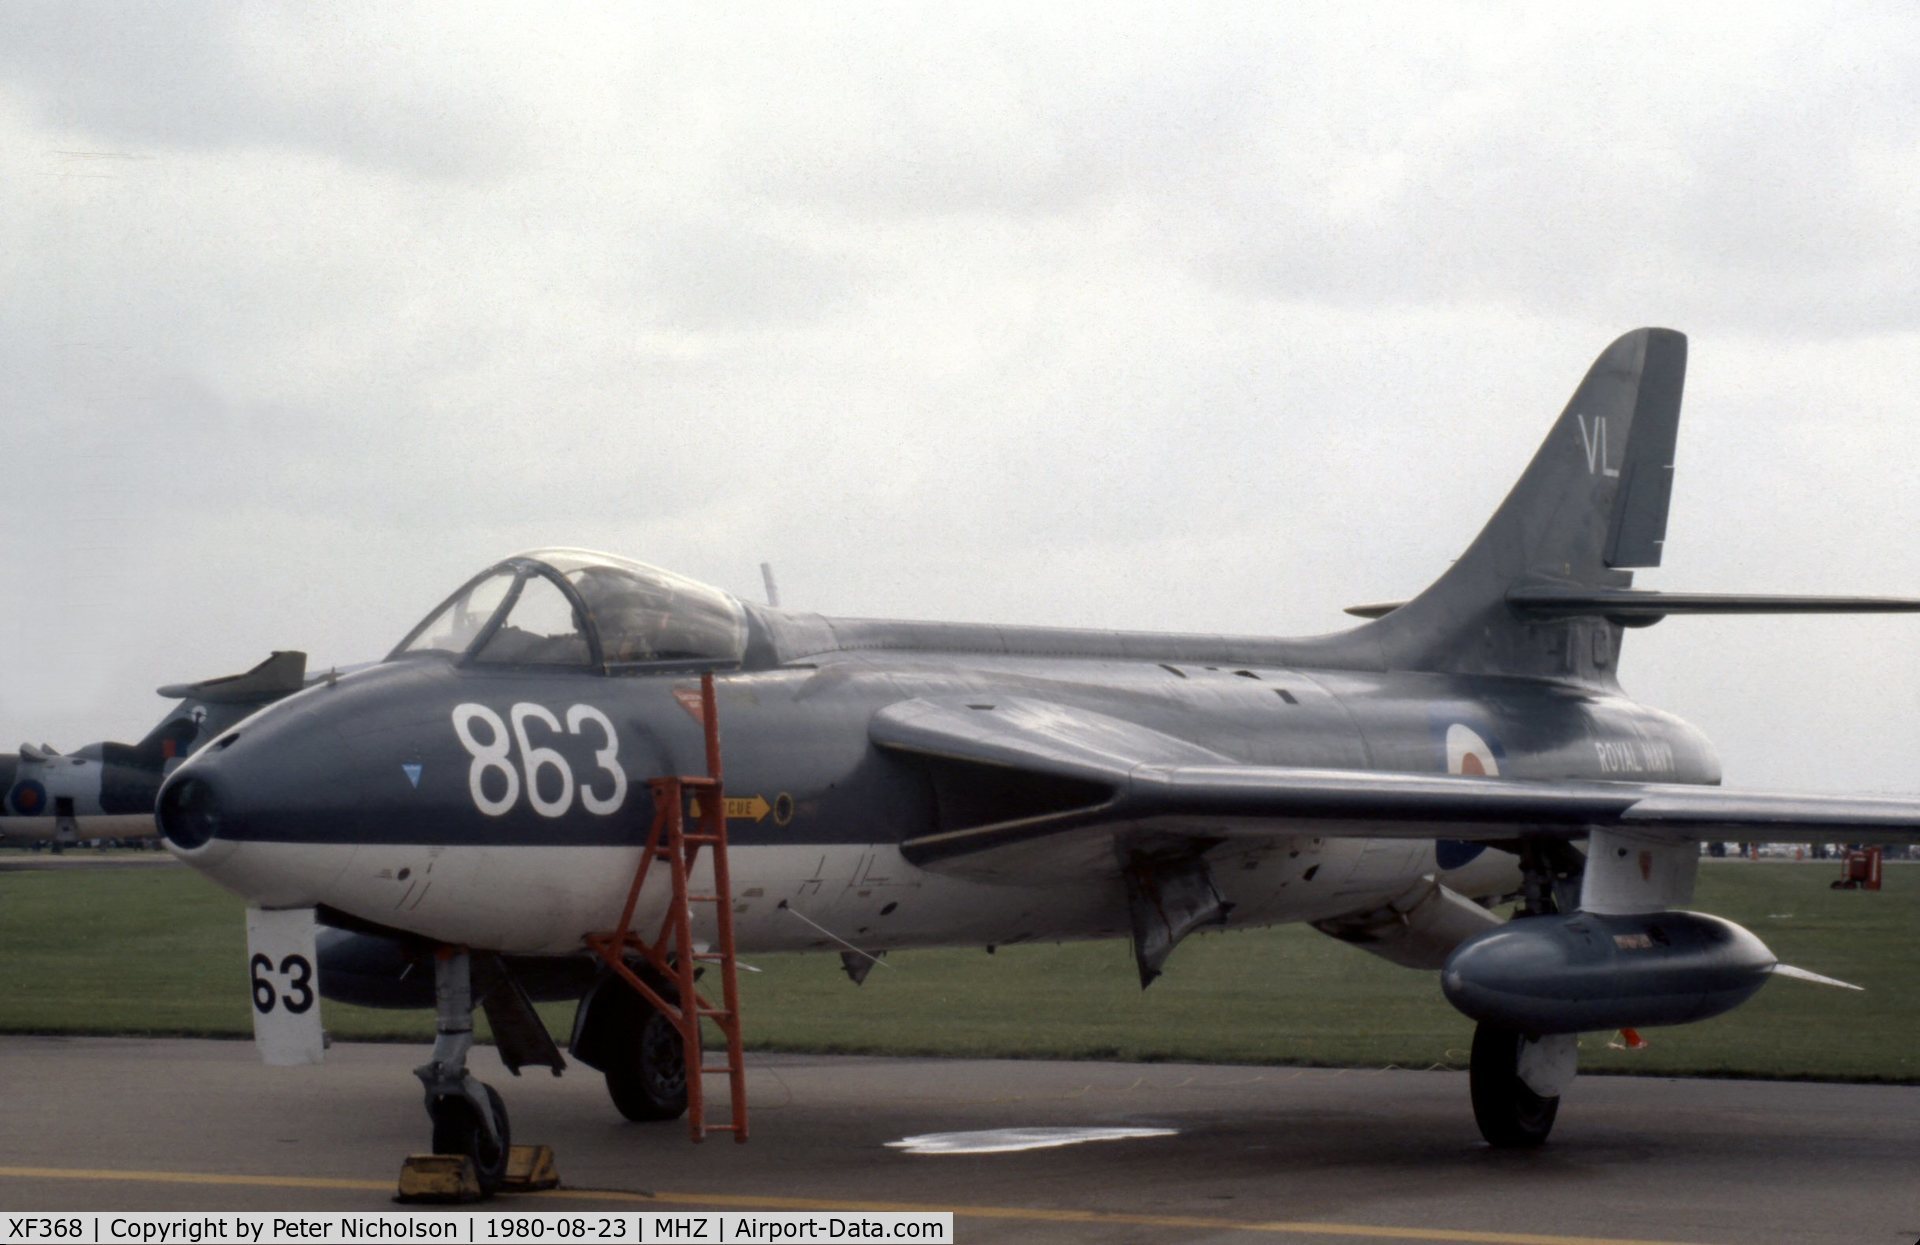 XF368, 1956 Hawker Hunter GA.11 C/N HABL-003097, Another of the Blue Herons aerobatic display team at the 1980 Mildenhall Air Fete.